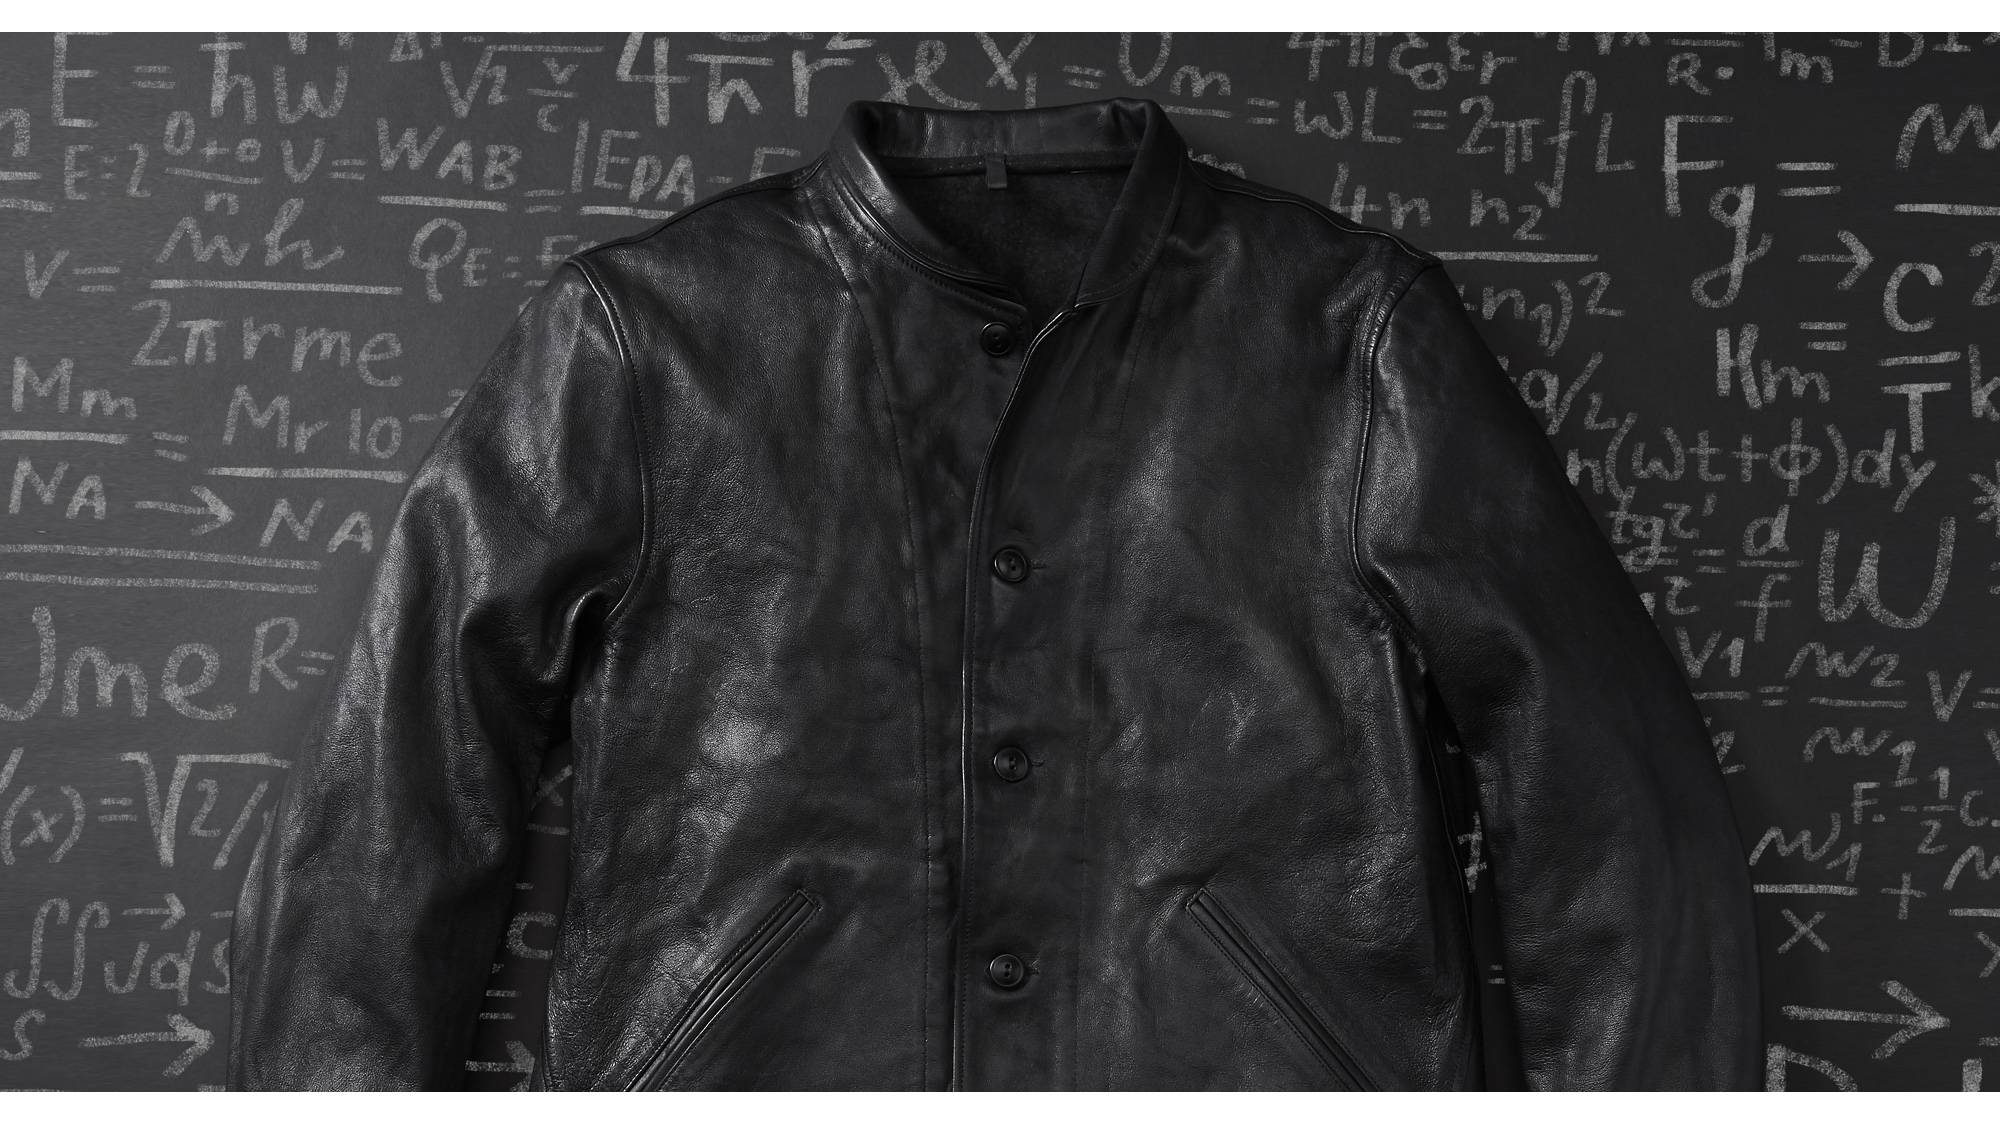 Einstein's original Levi's® Menlo Cossack leather jacket laid on top of a chalkboard background with numbers and equations.